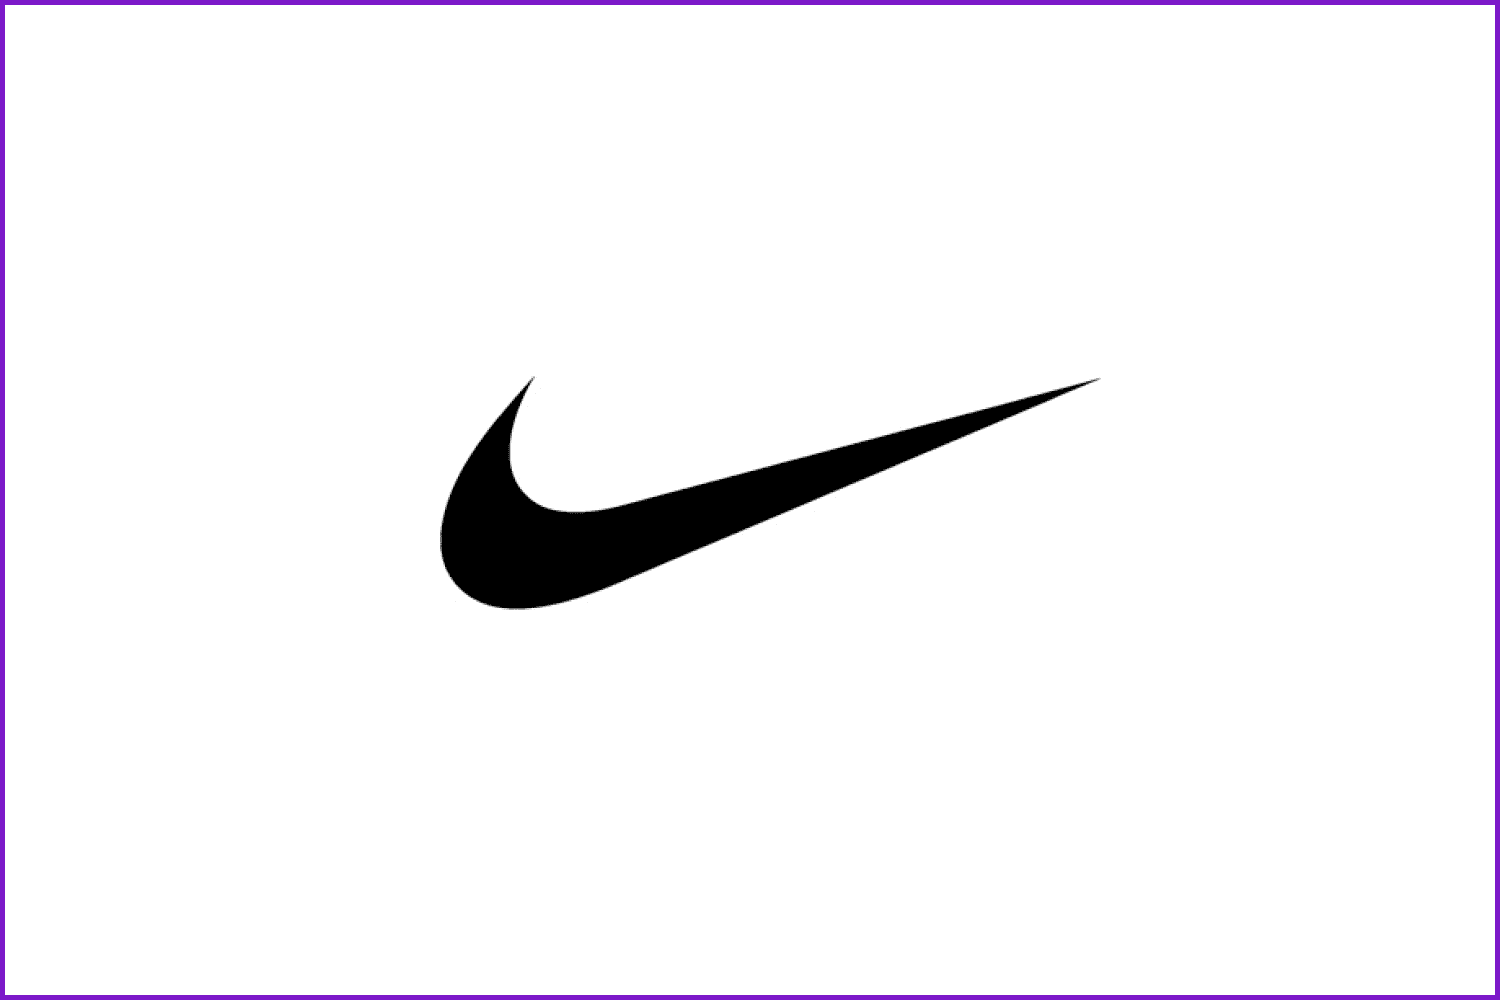 Il duidelijkheid Informeer Meaning, History, and Evolution of the Nike Logo